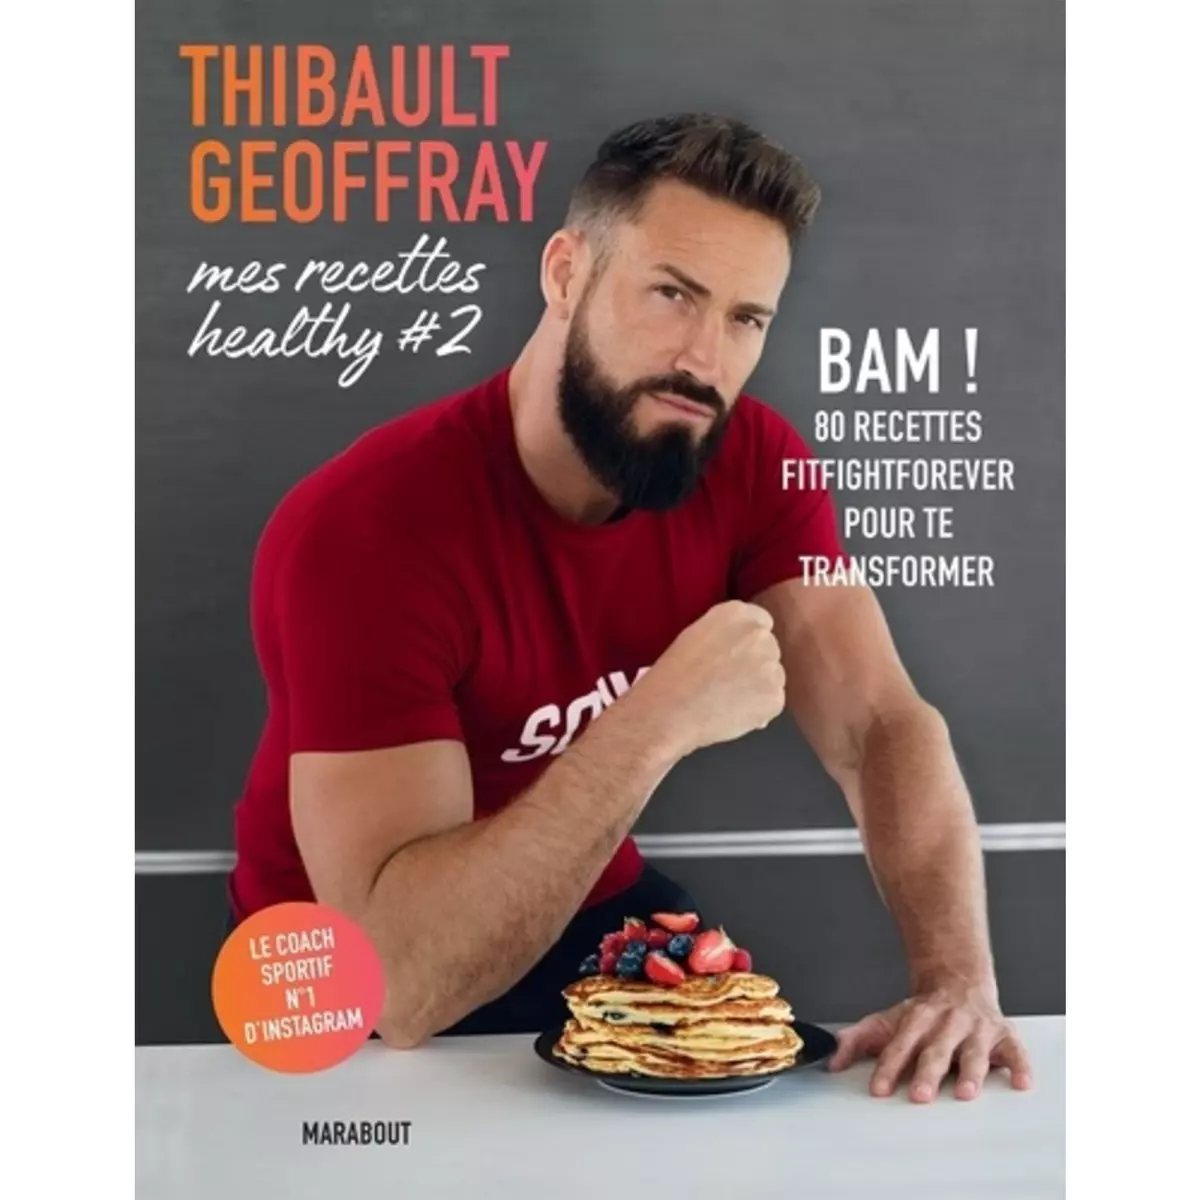  MES RECETTES HEALTHY. TOME 2, Geoffray Thibault